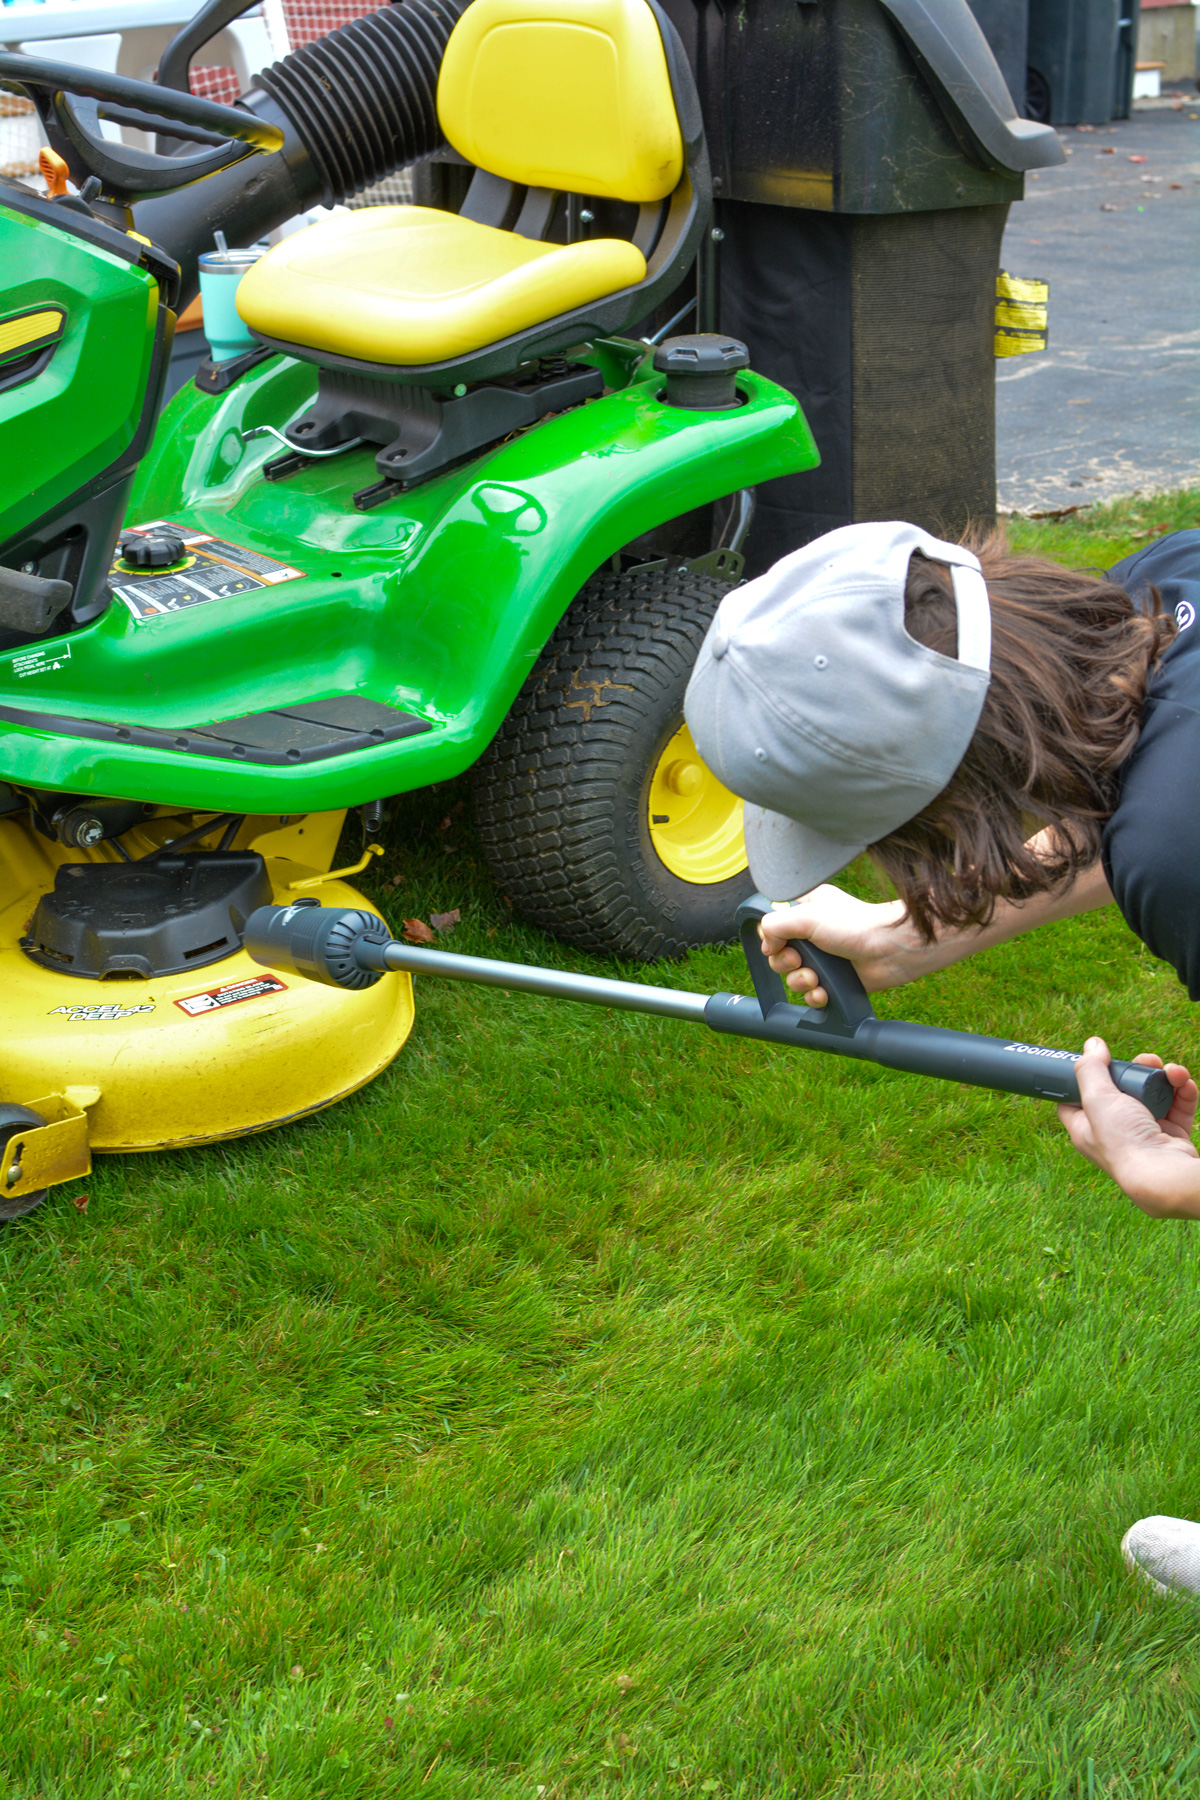 cleaning lawnmower with zoombroom